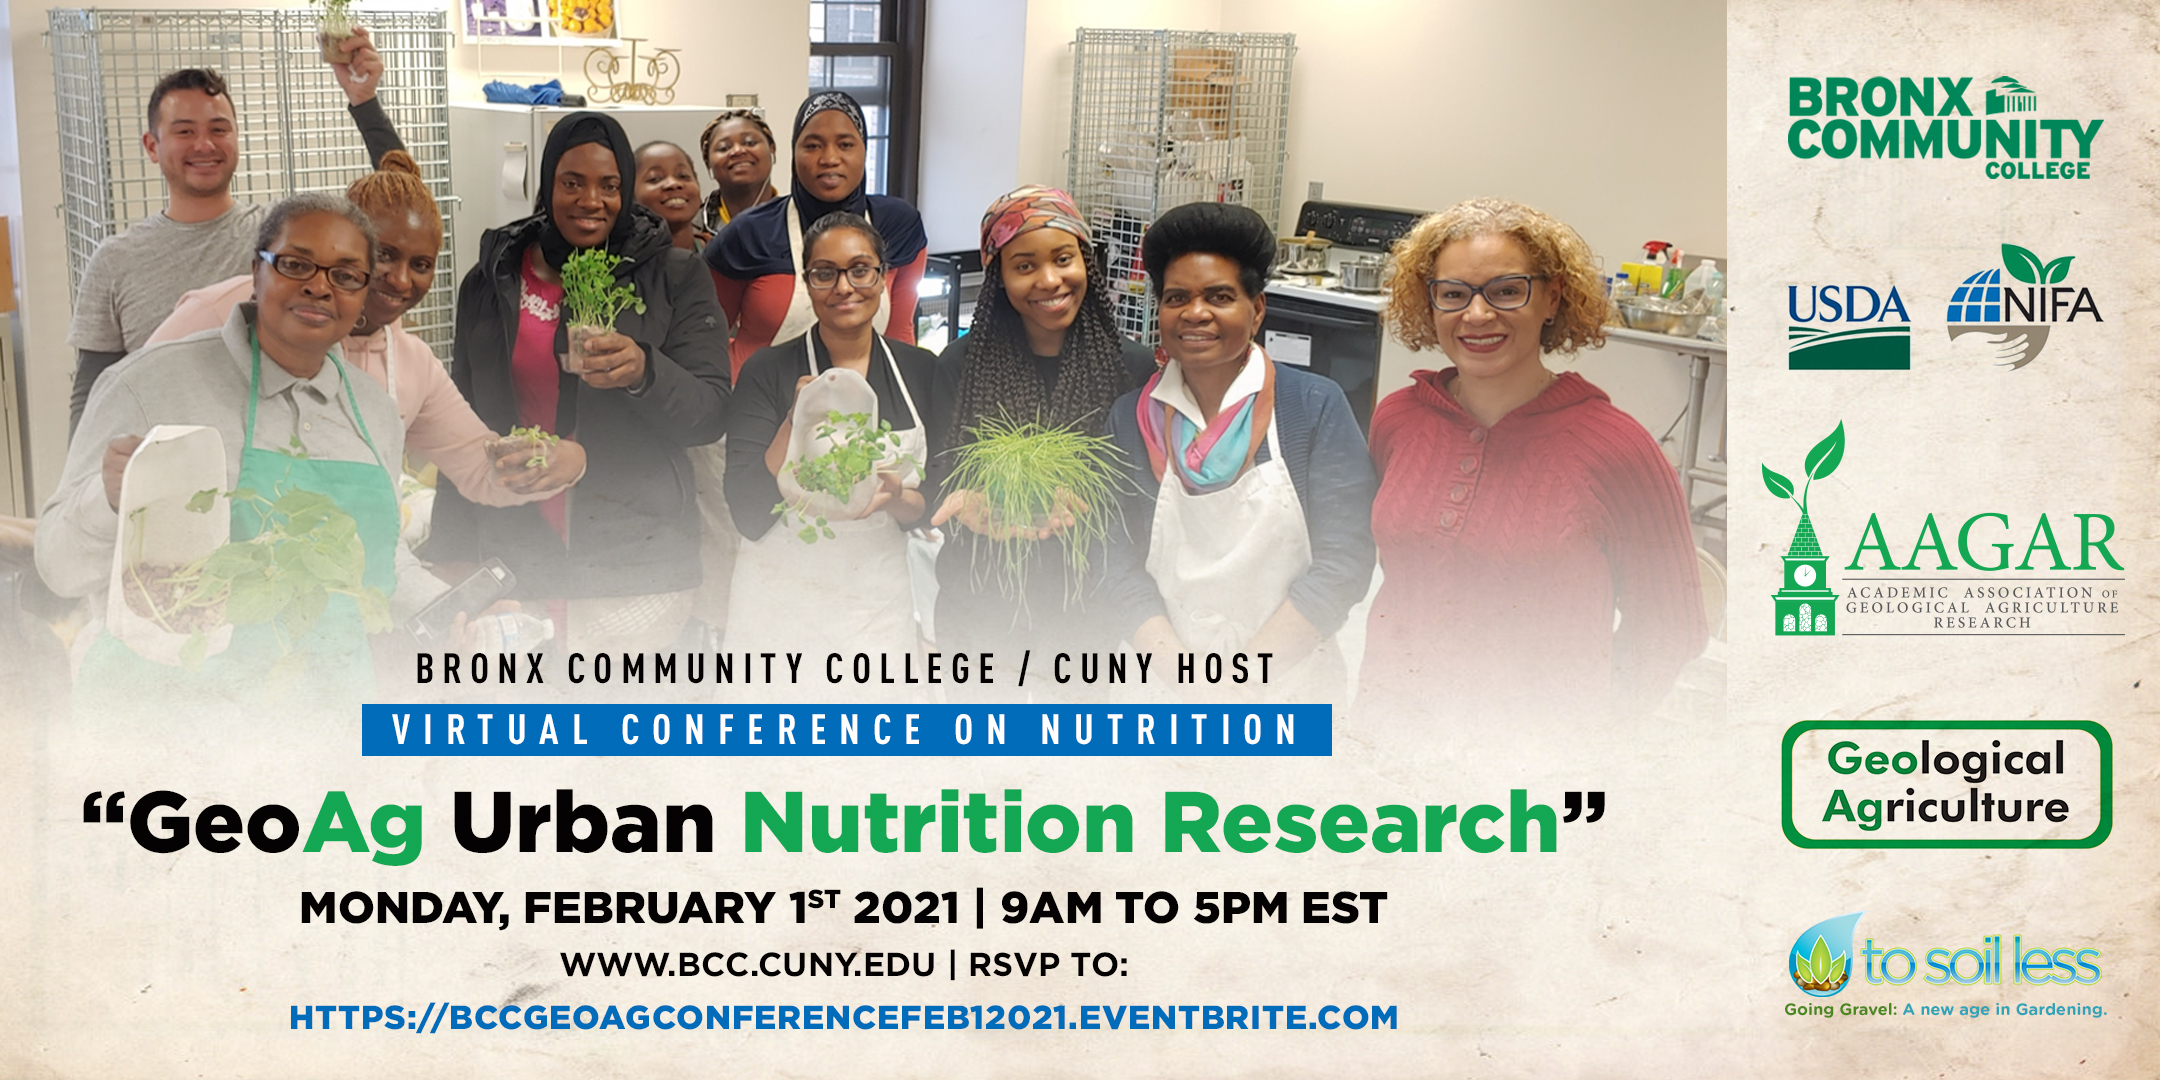 Bronx Community College/CUNY Wins First-Ever United States Department of Agriculture Grant to Showcase Innovative Research to Improve Nutrition Access in the Bronx Through Rocks